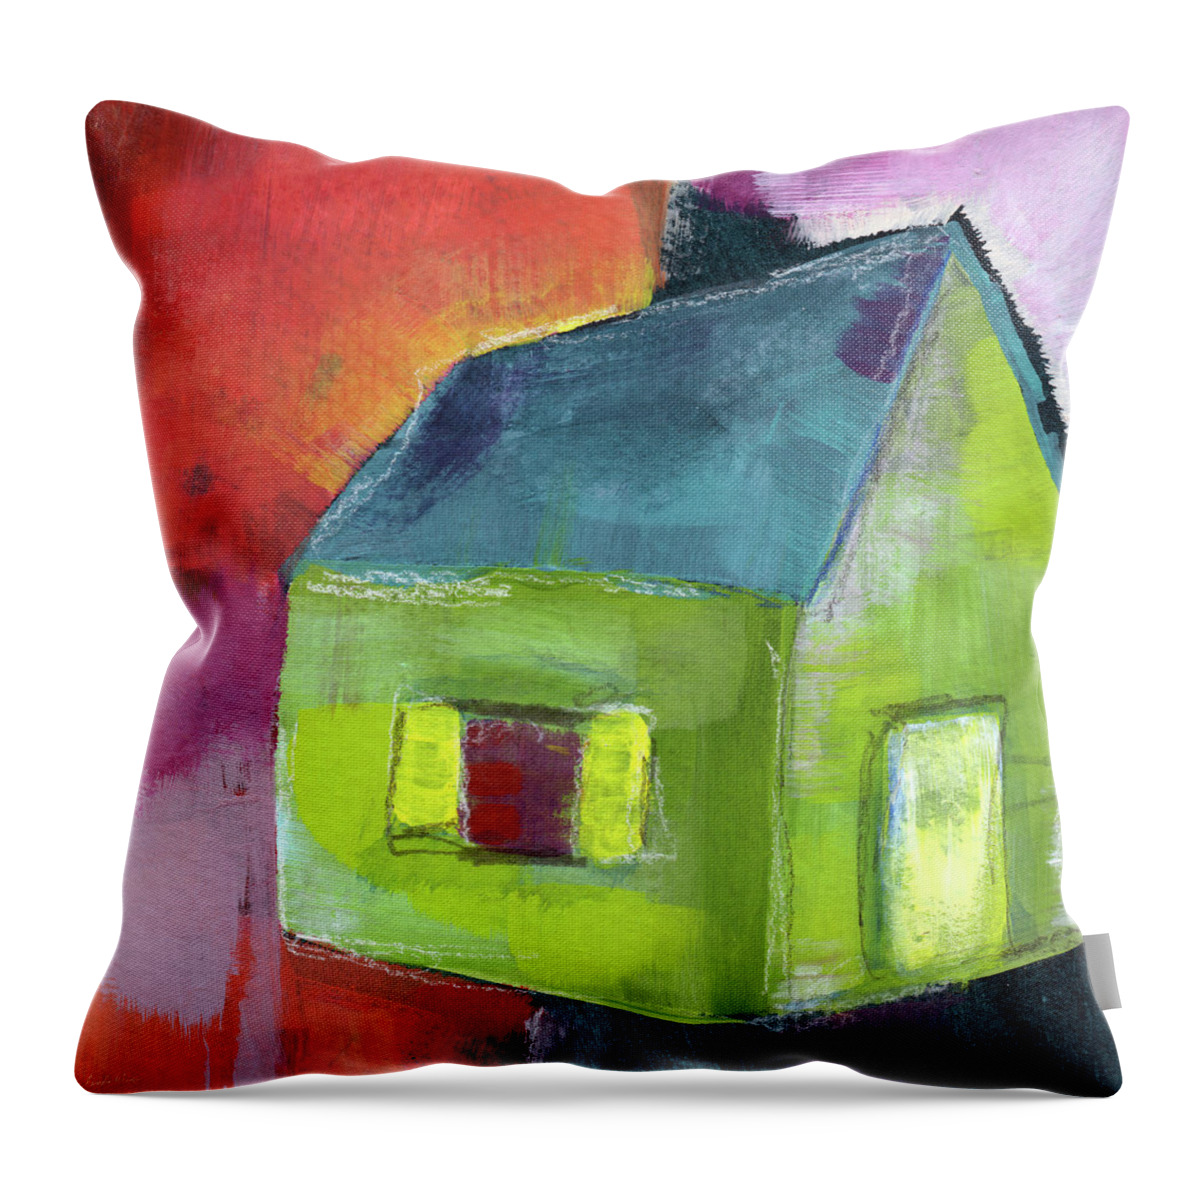 House Throw Pillow featuring the painting Green House- Art by Linda Woods by Linda Woods